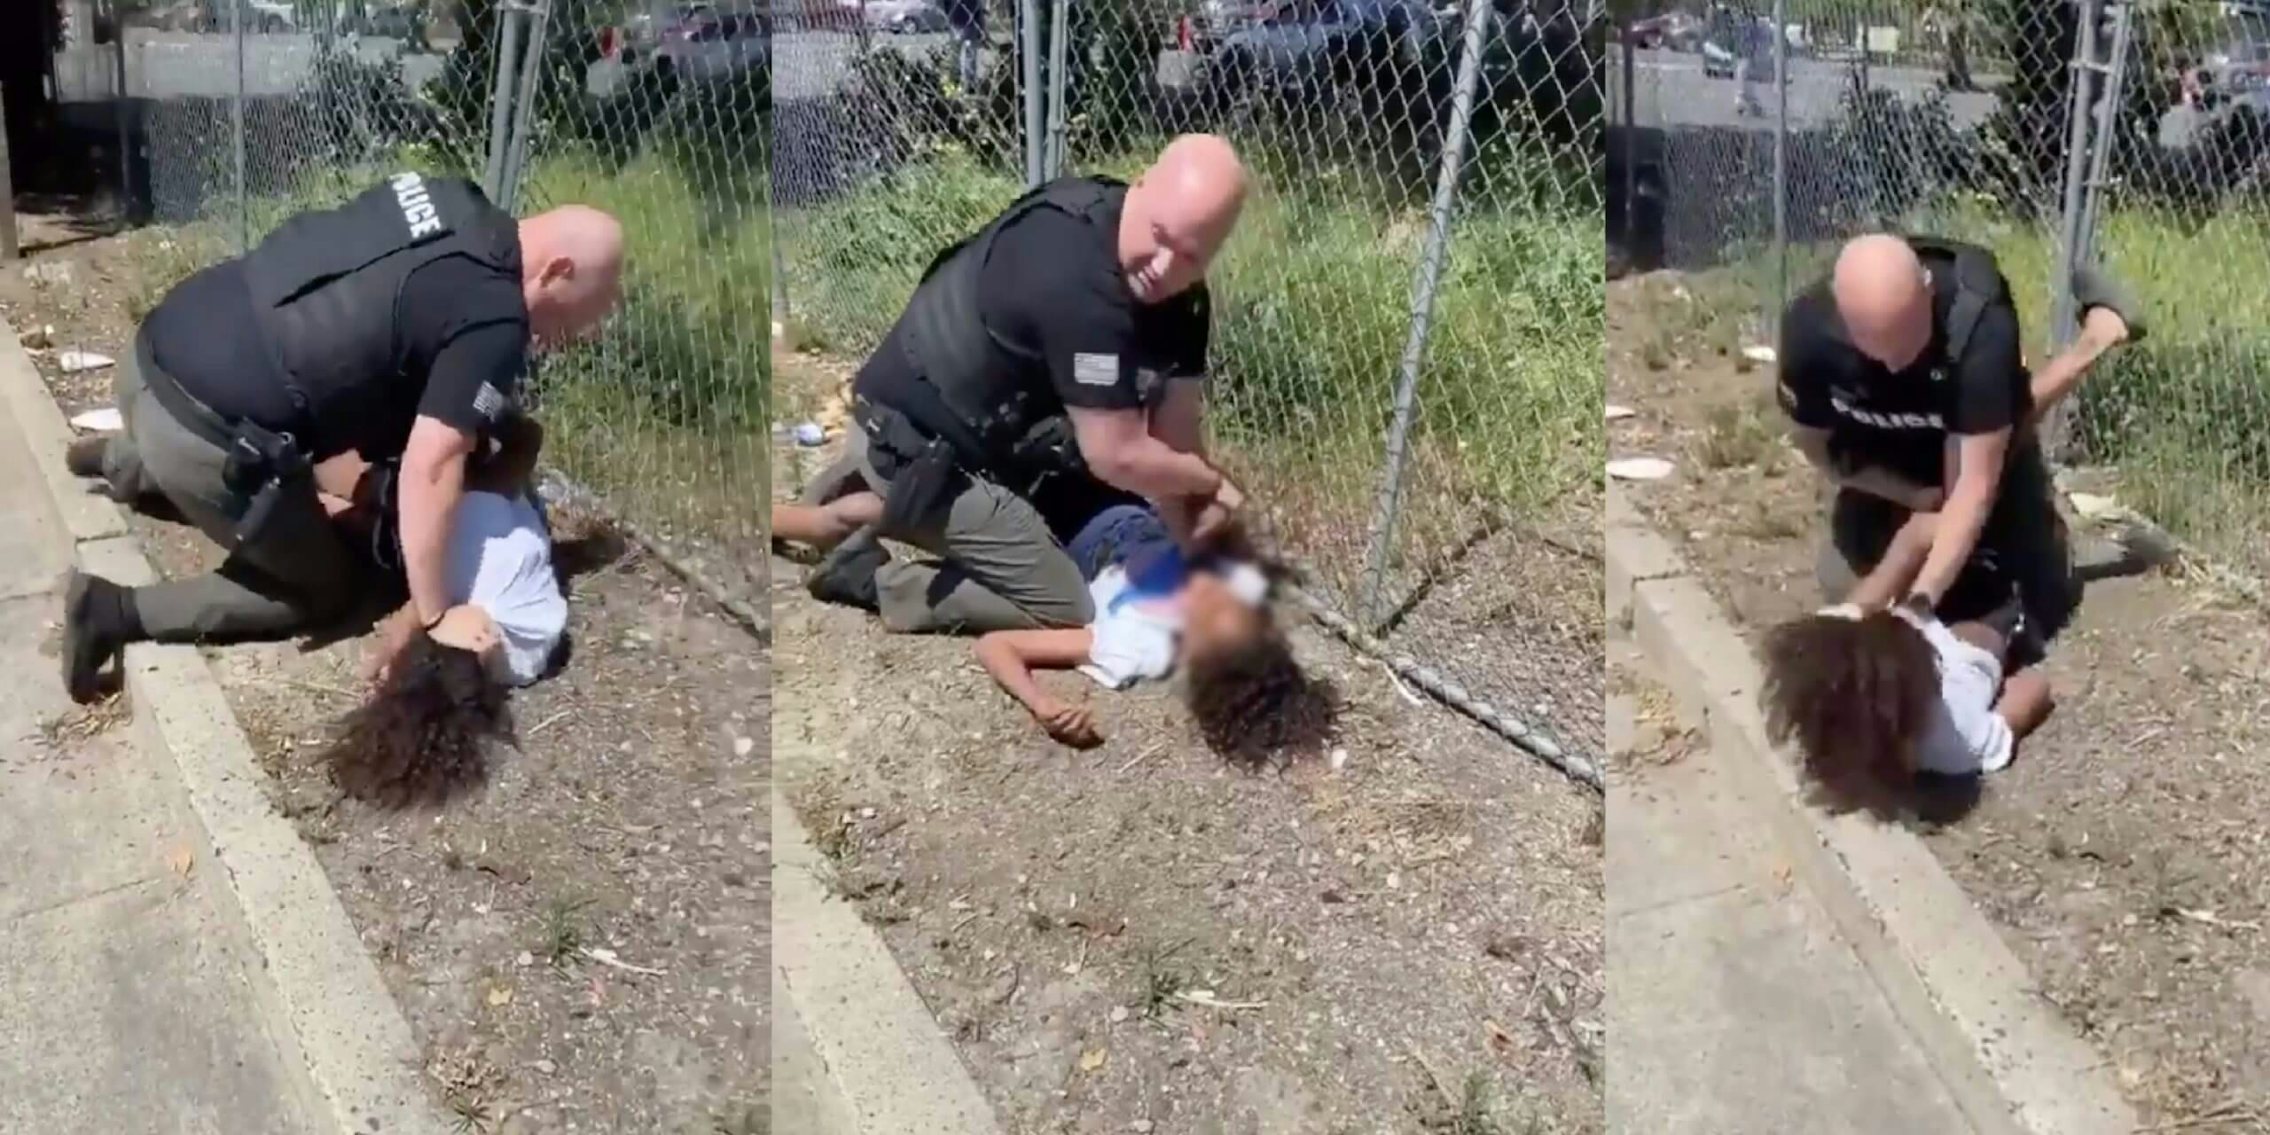 Screenshots show officer beating the boy in three different positions in 15-seconds